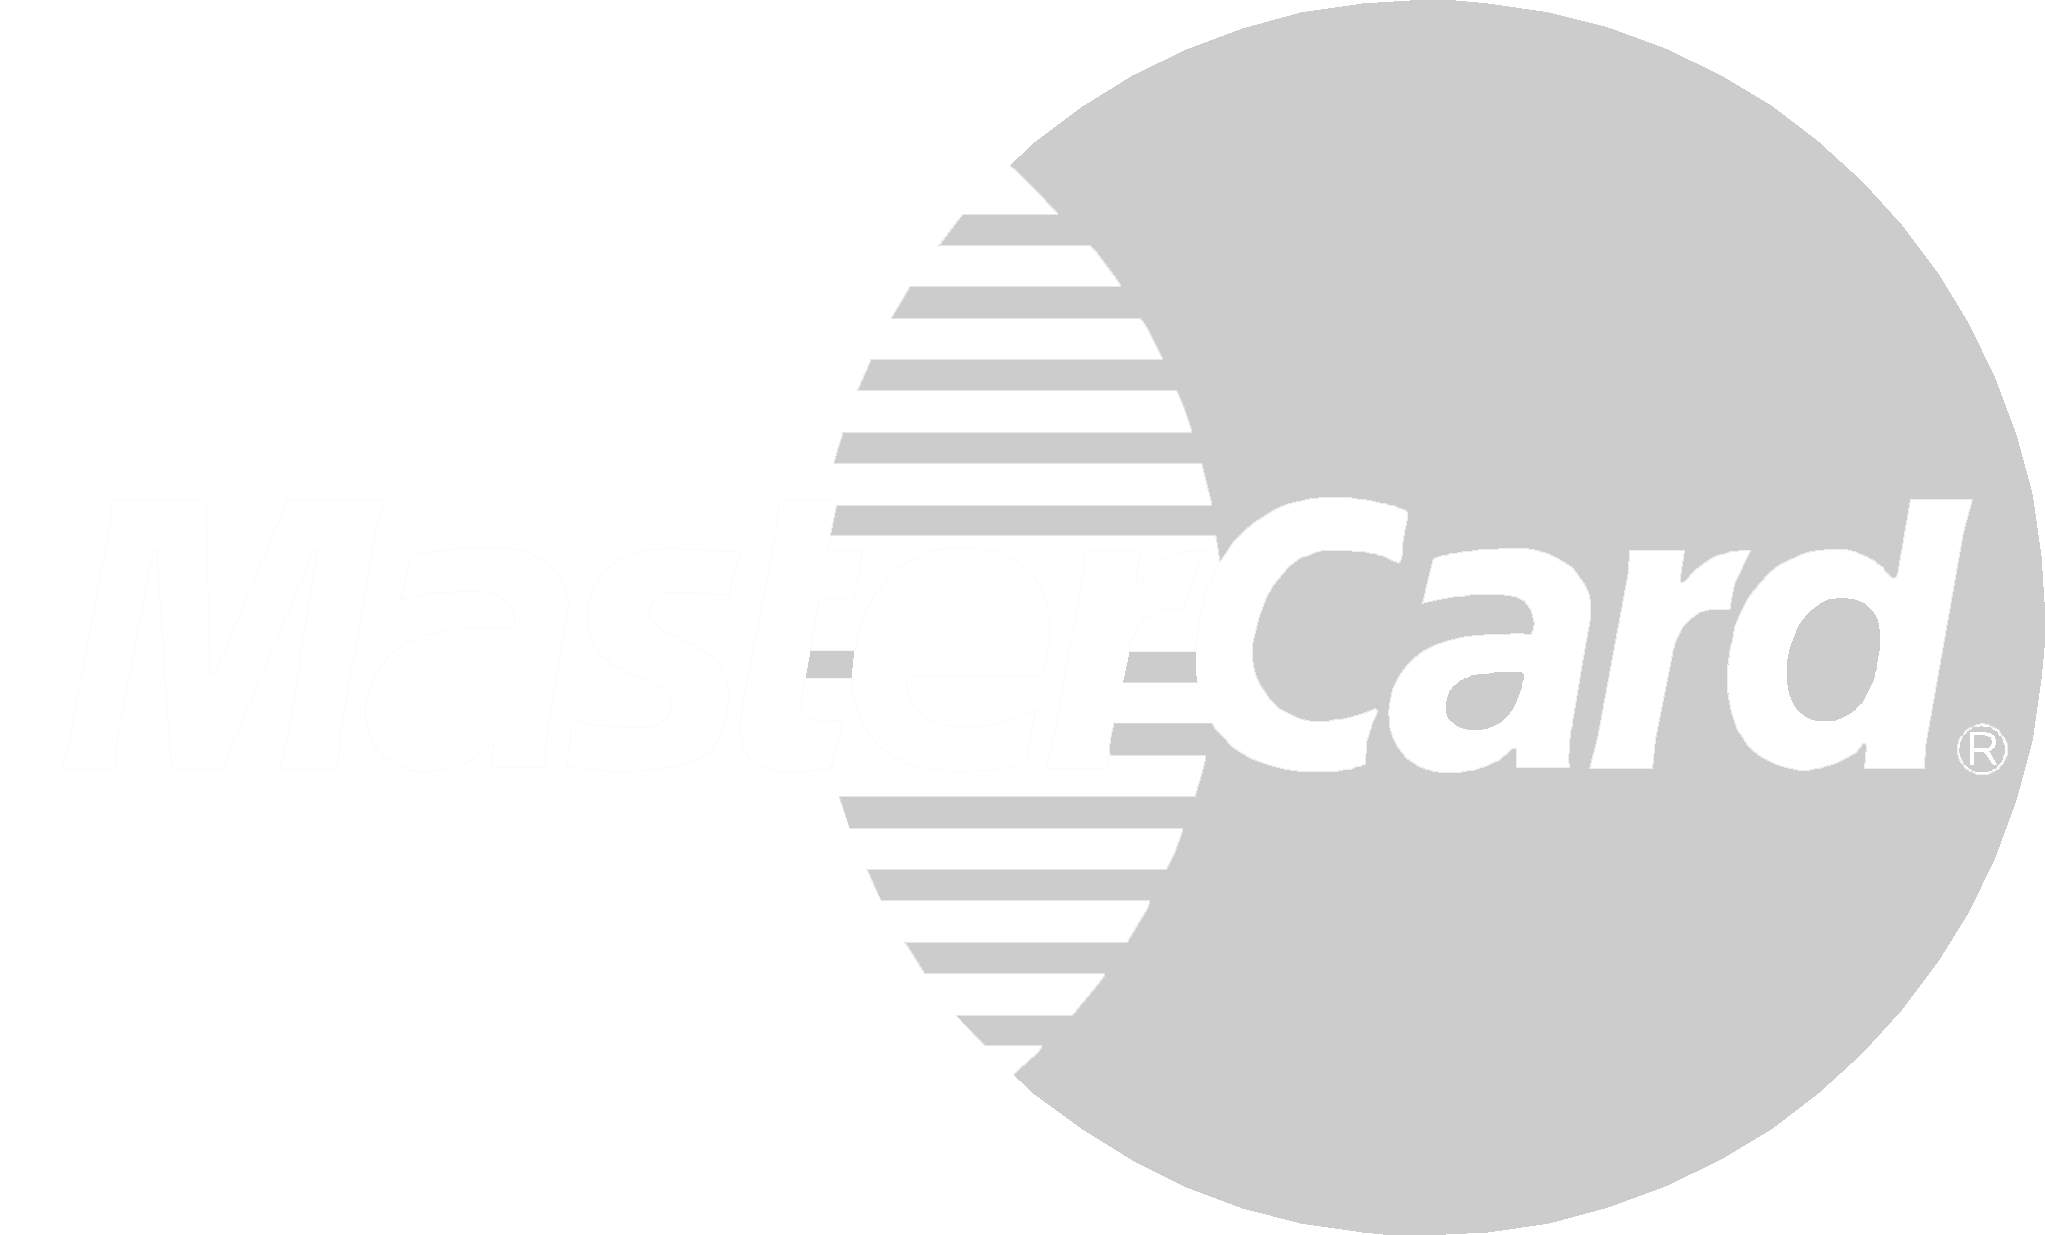 Black And White Mastercard Logo Vector Pictures To